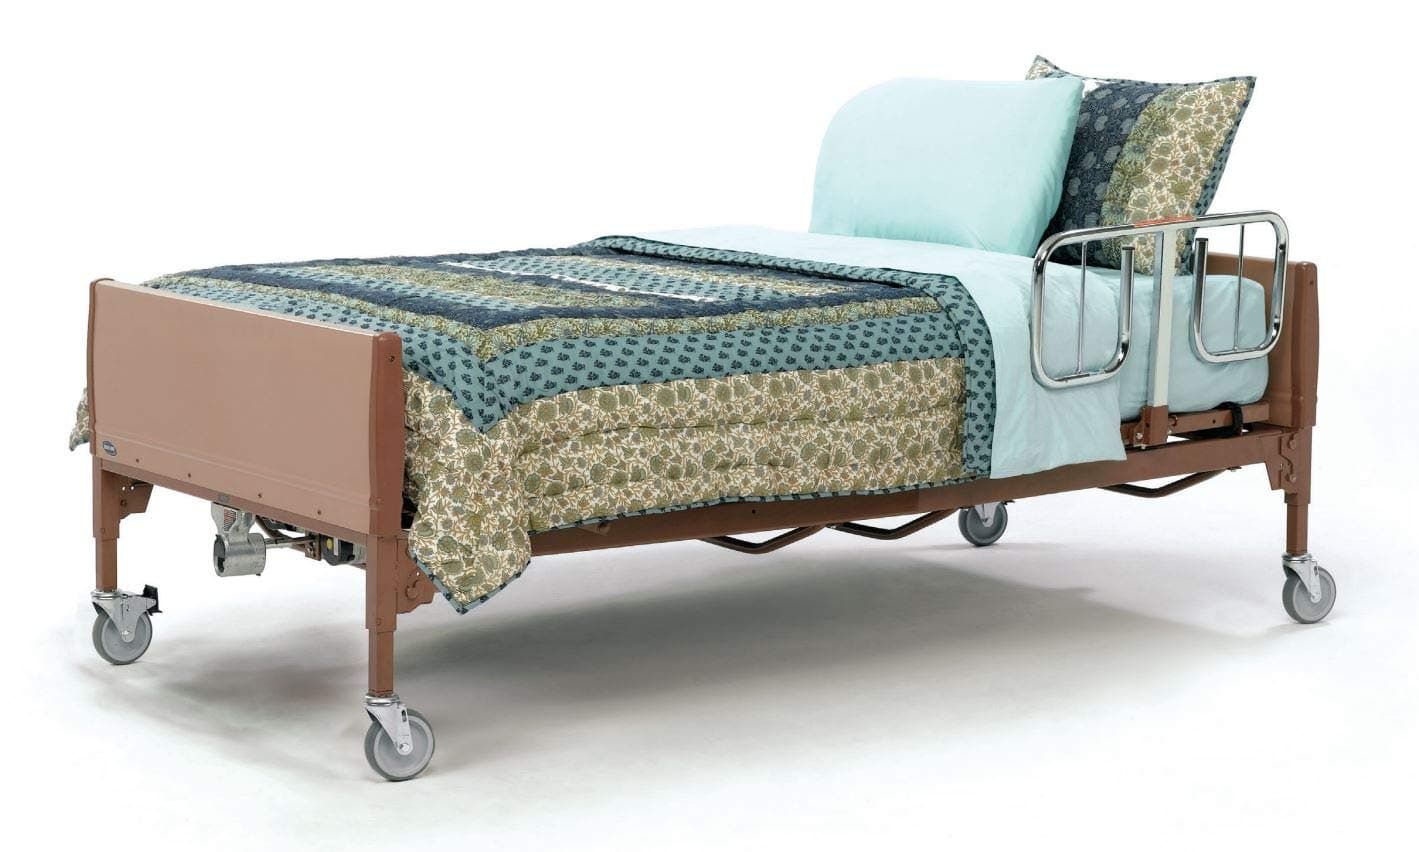 Invacare Bariatric Full Electric Homecare Bed Package with Soft Foam Mattress & Half Rails - Senior.com Bed Packages